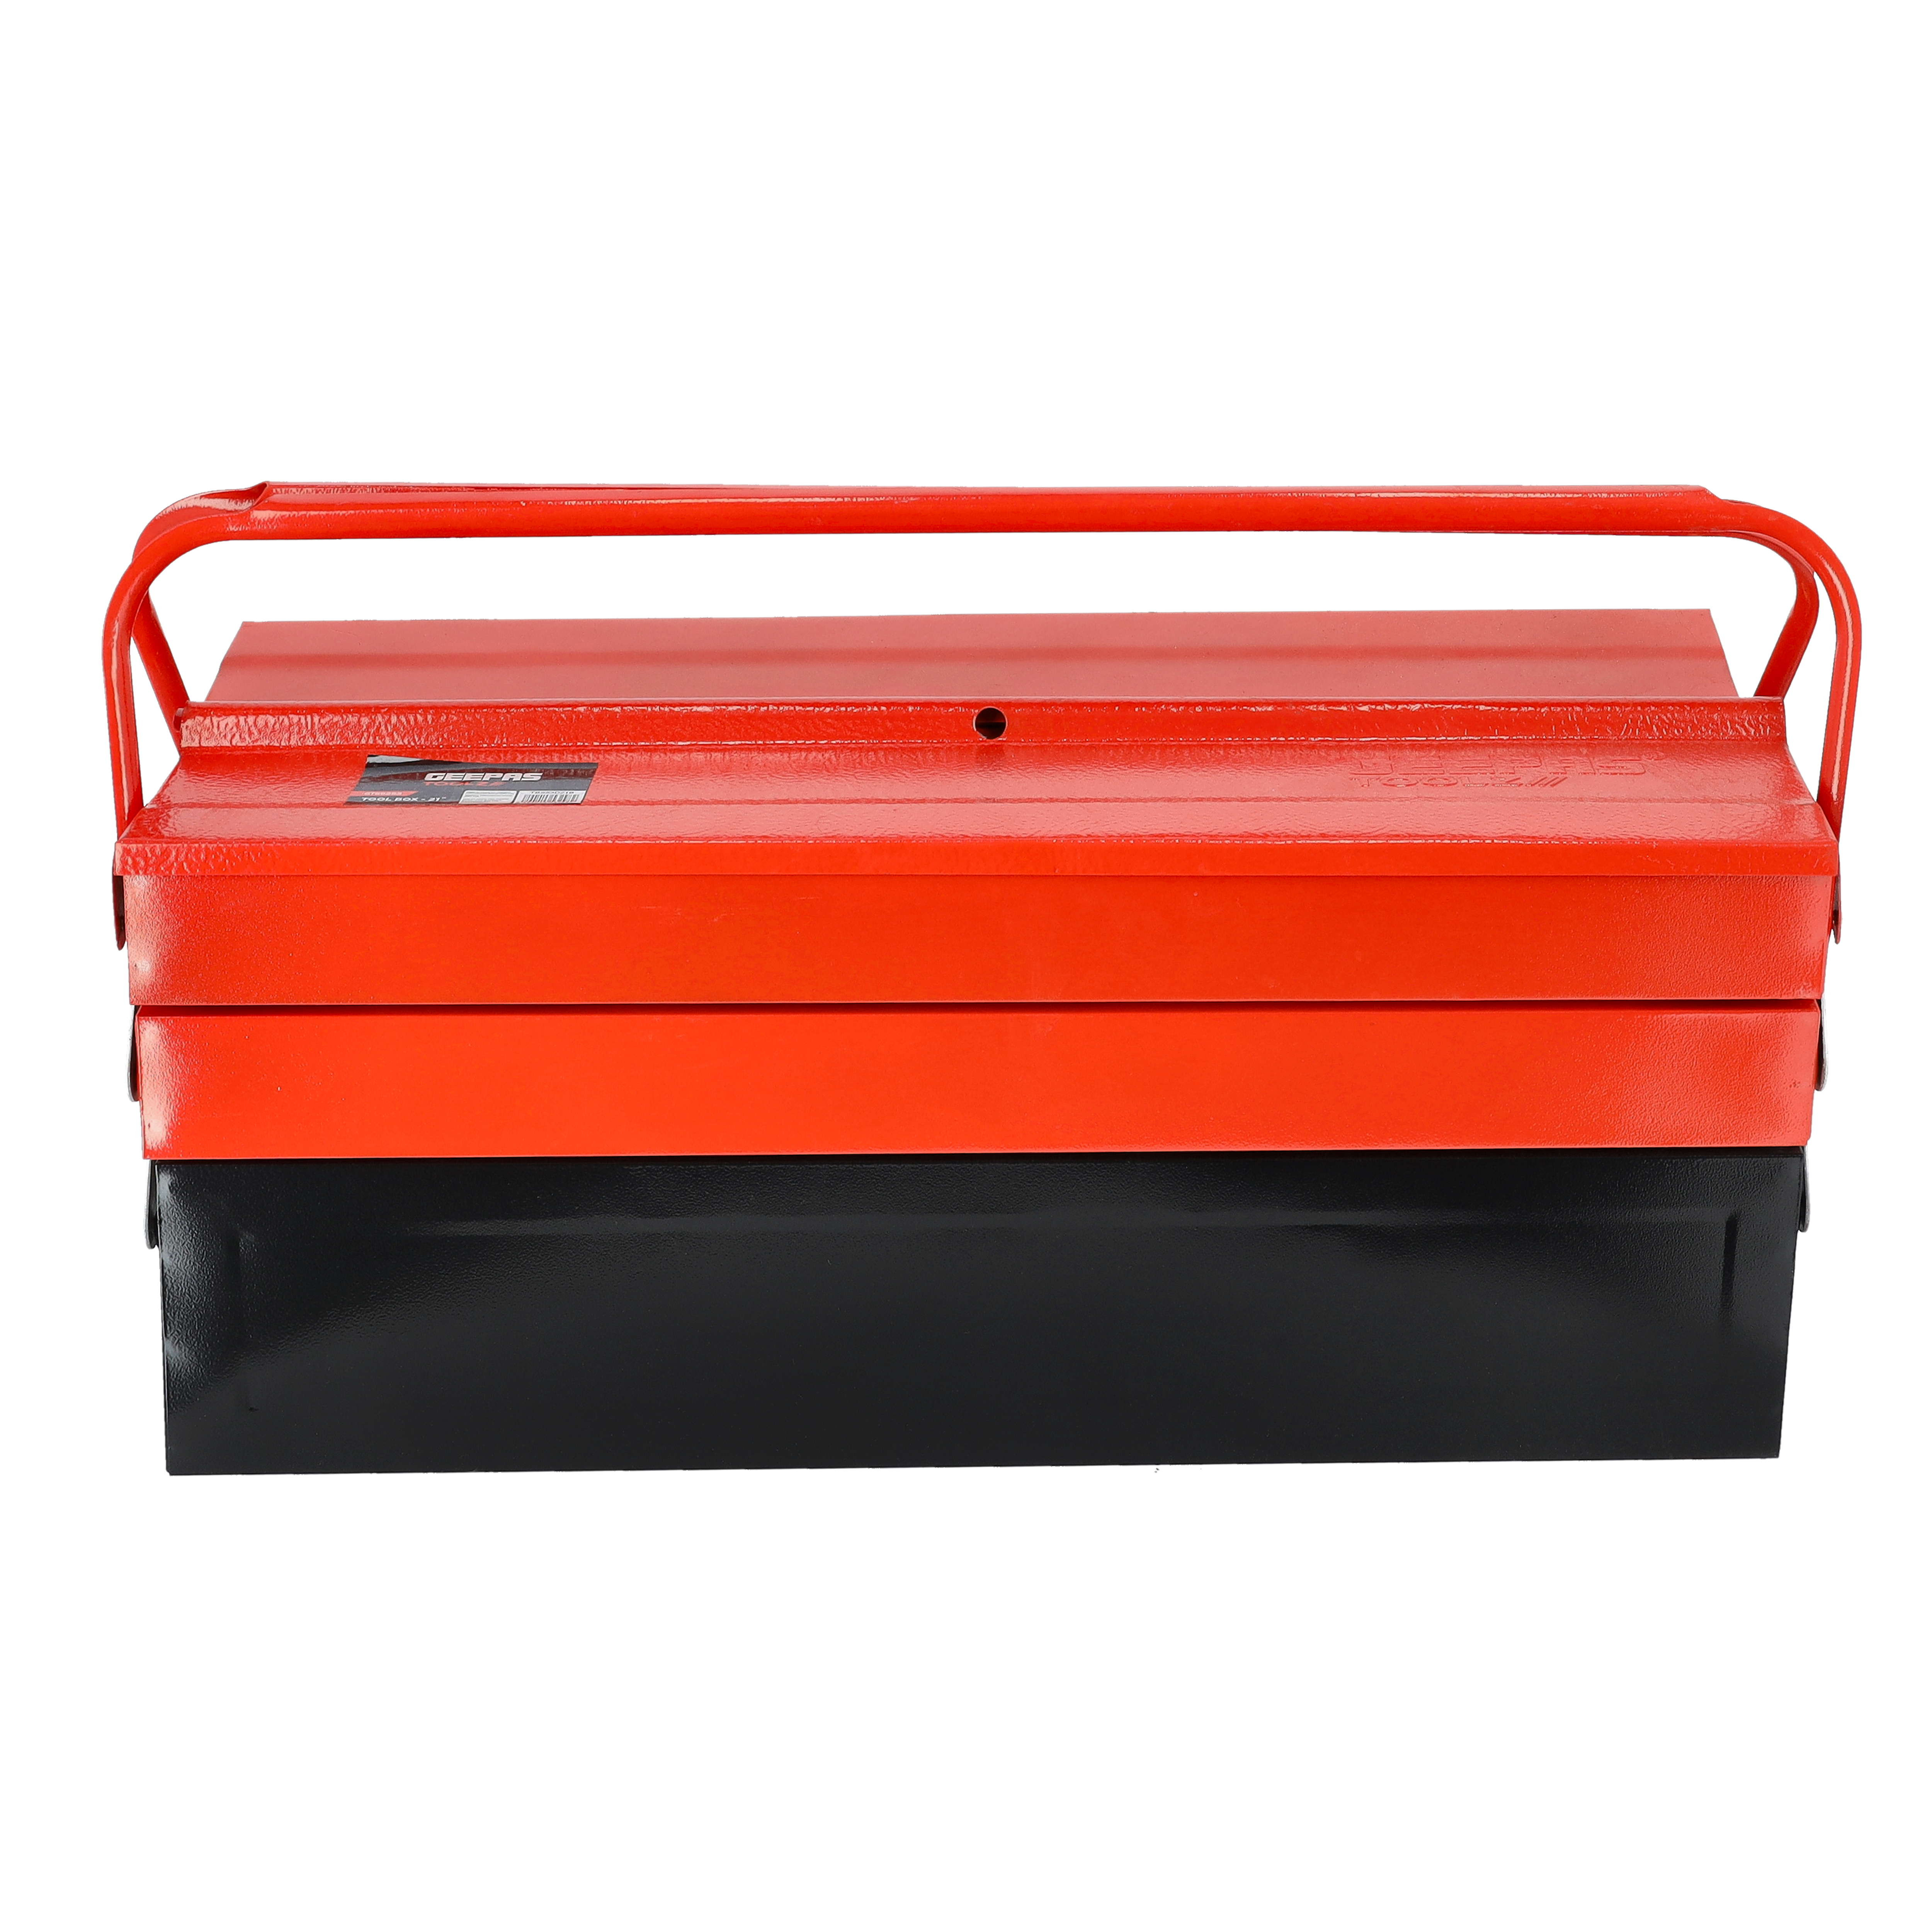 Geepas GT59020 16 Plastic Tool Box with Gripped Handle